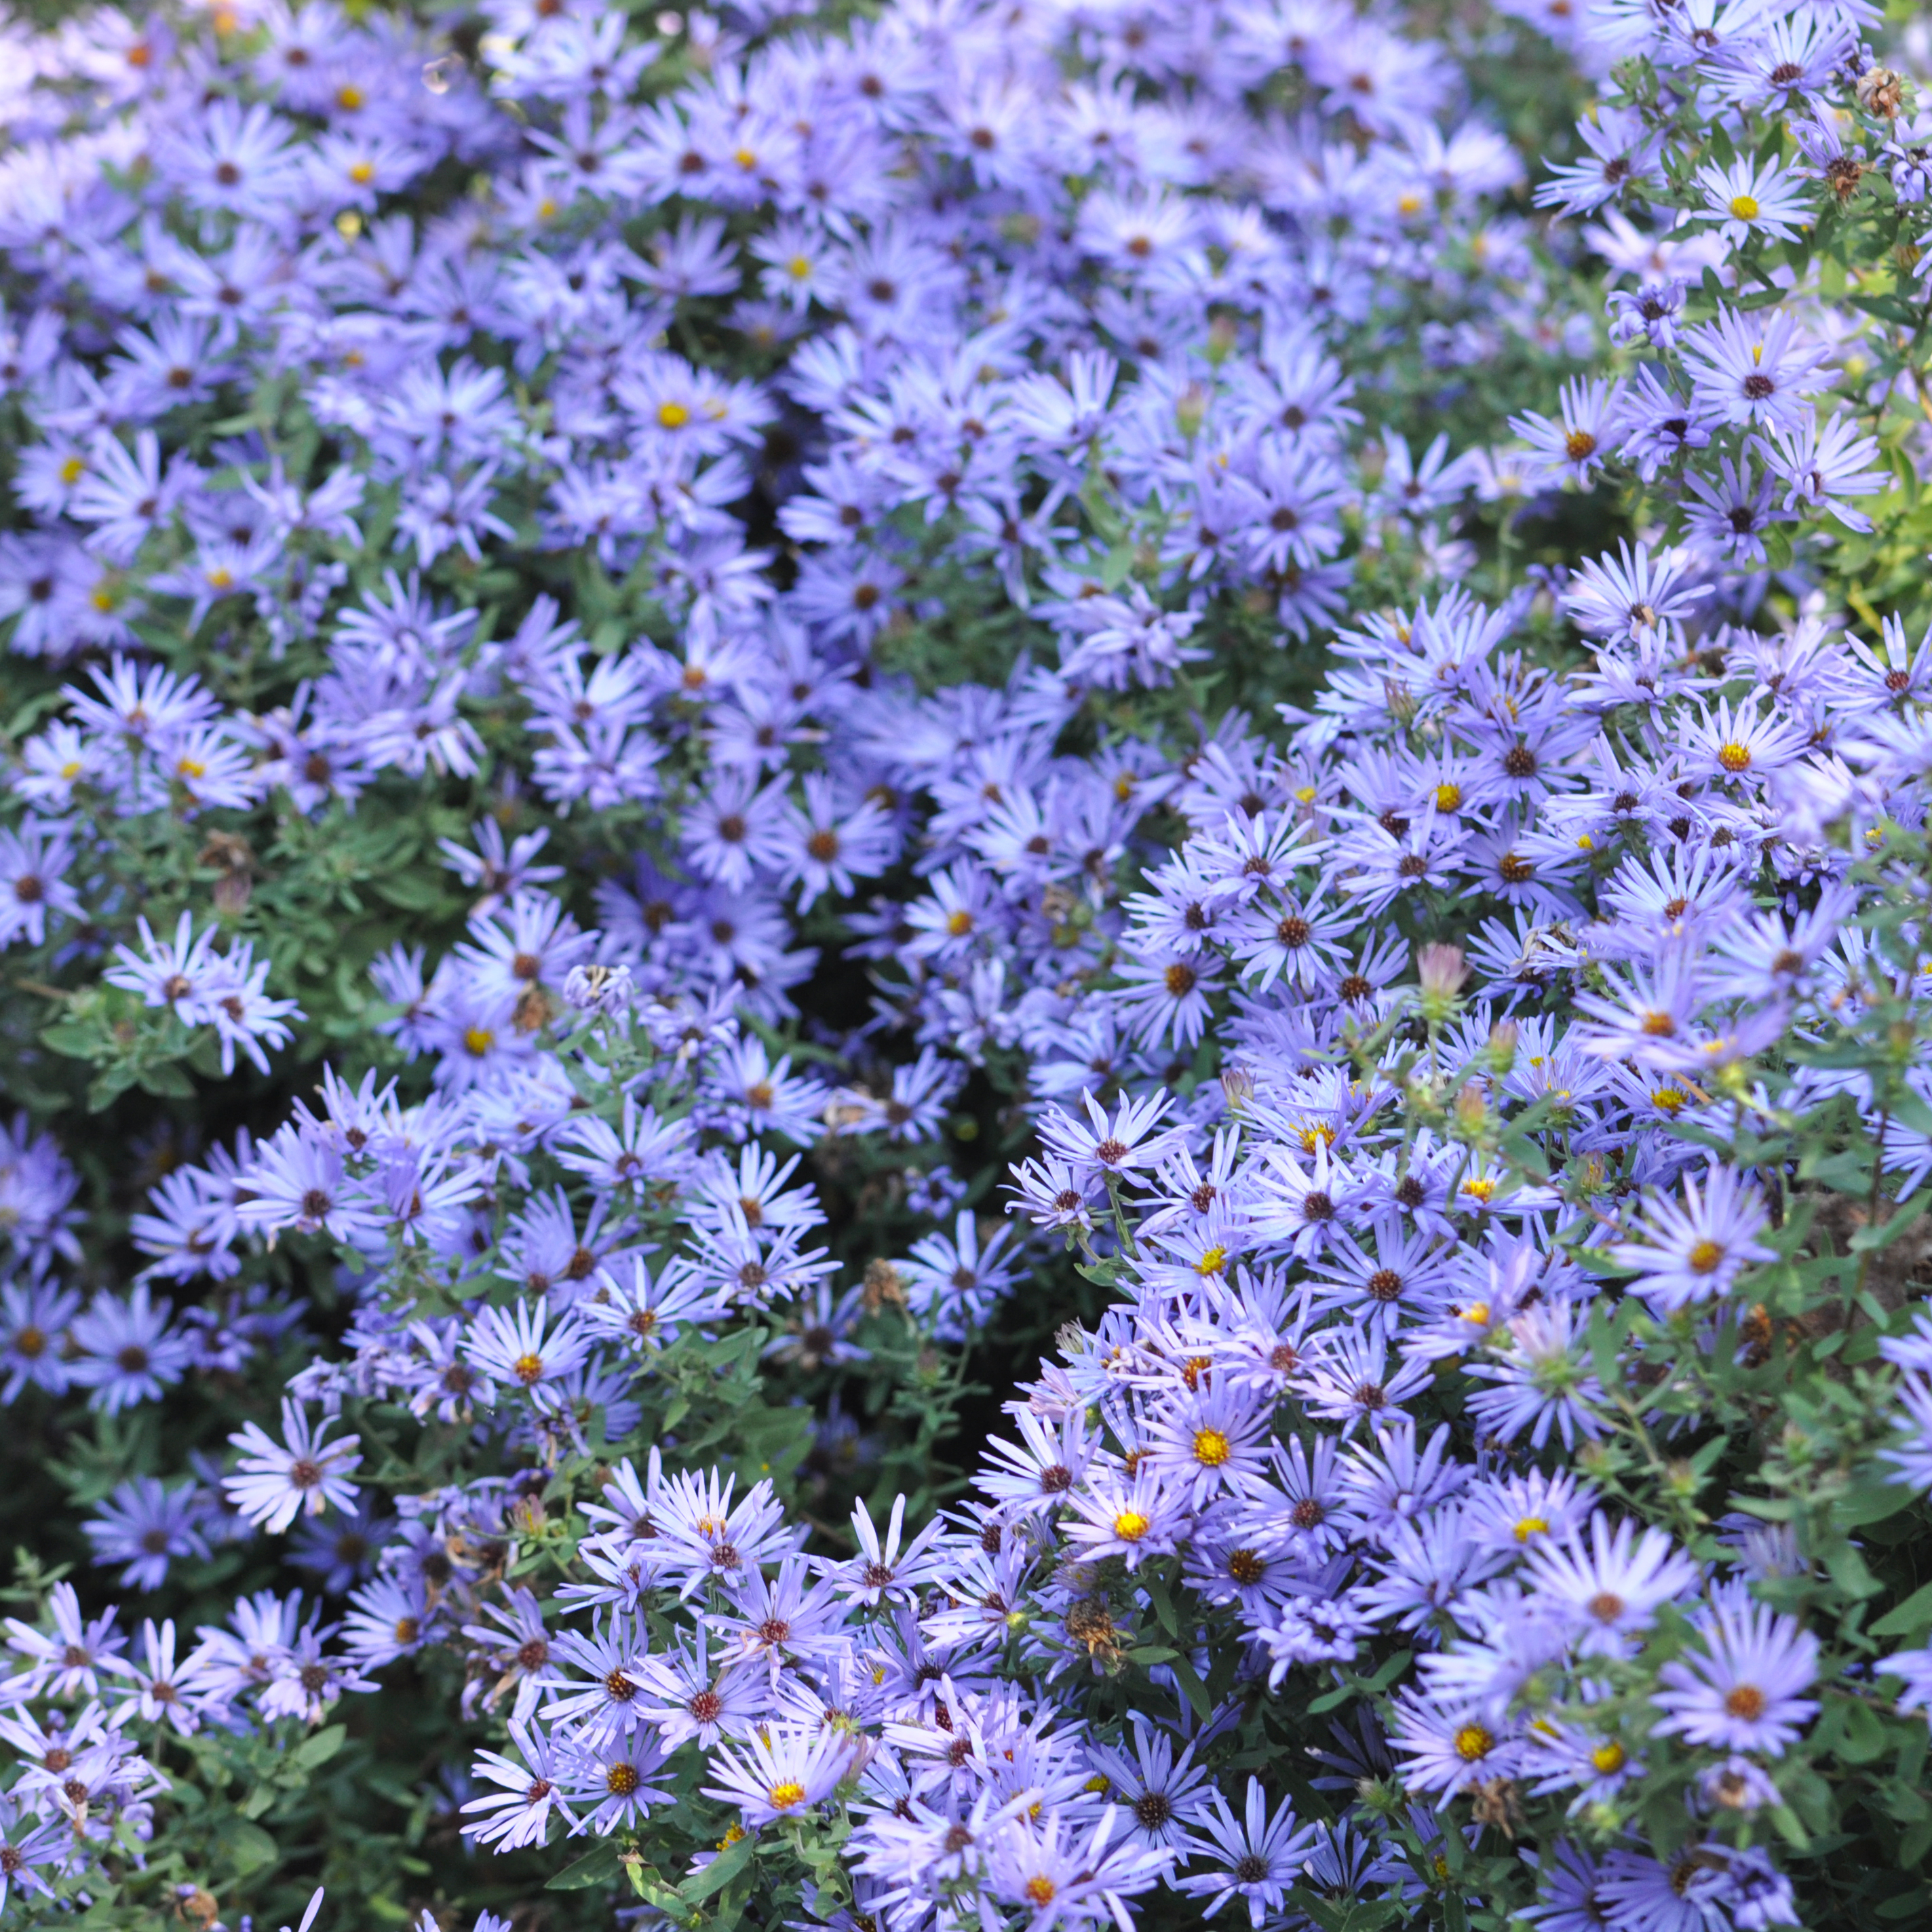 Eastern aromatic aster